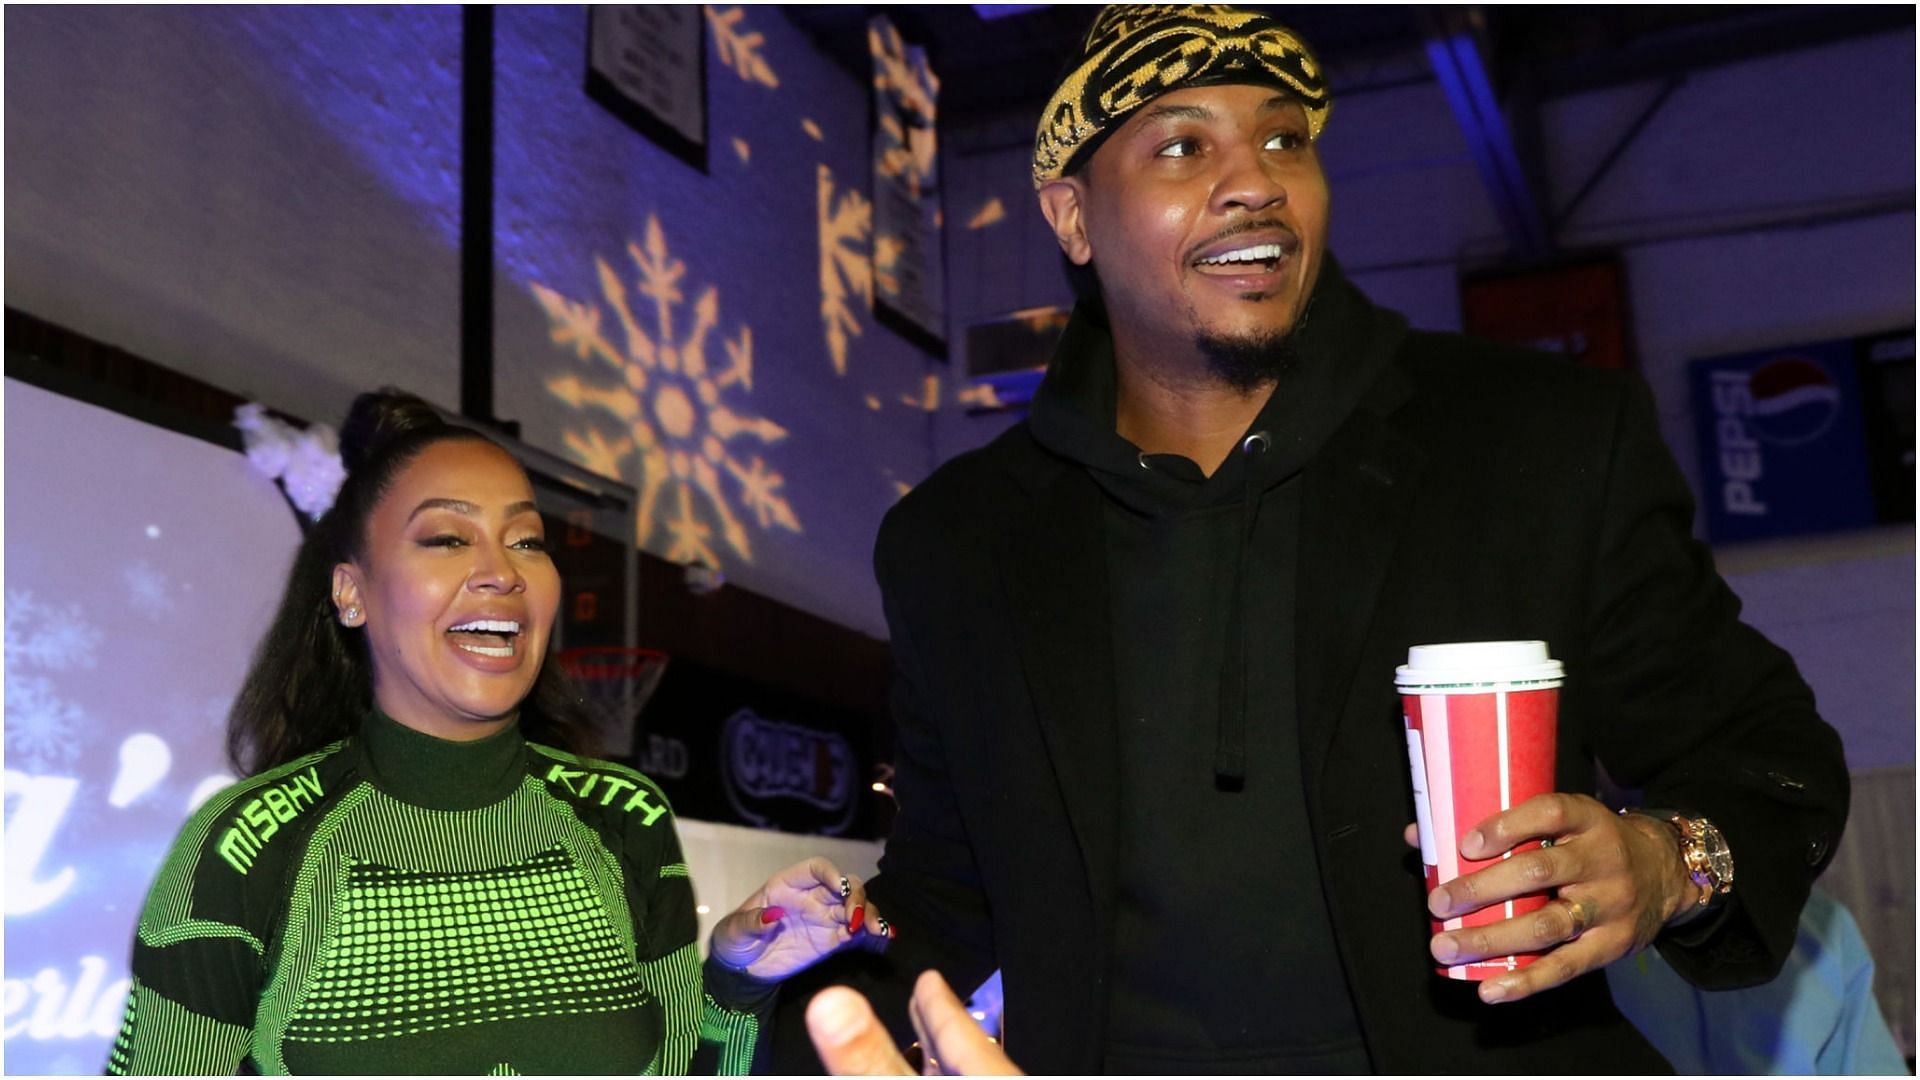 La La Anthony and Carmelo Anthony attend the 3rd Annual Winter Wonderland Holiday Charity Event (Image via Getty Images)